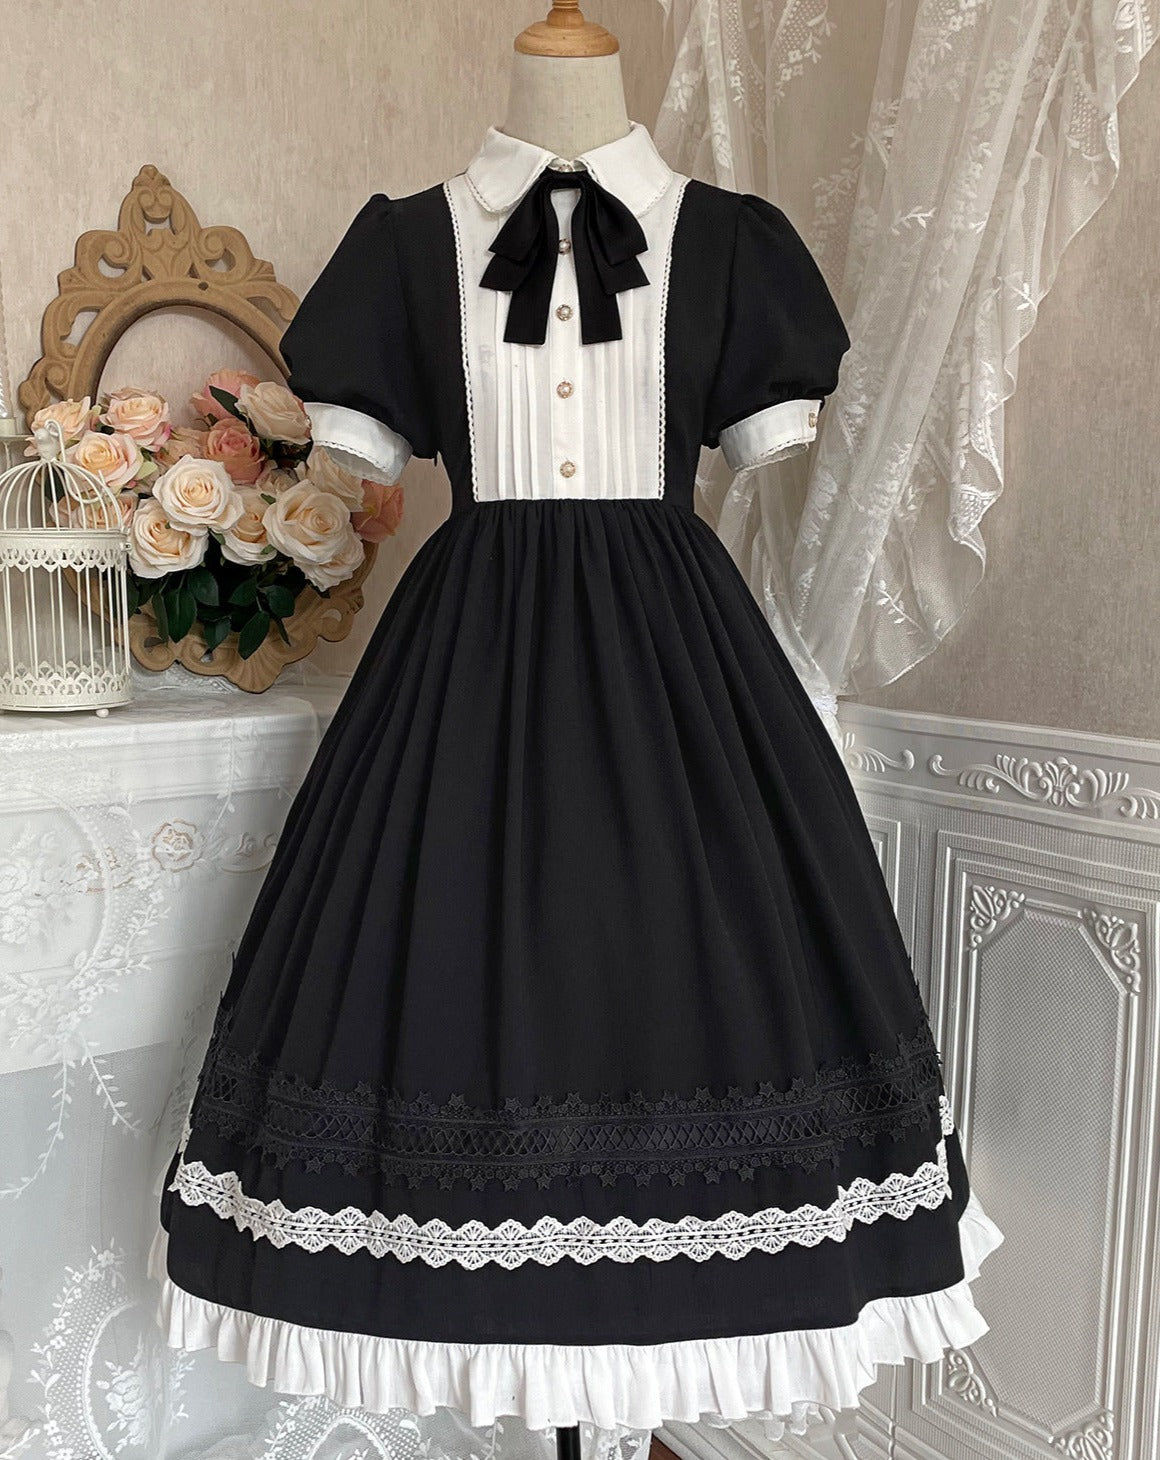 Classic Lolita short-sleeved dress with maid-style apron